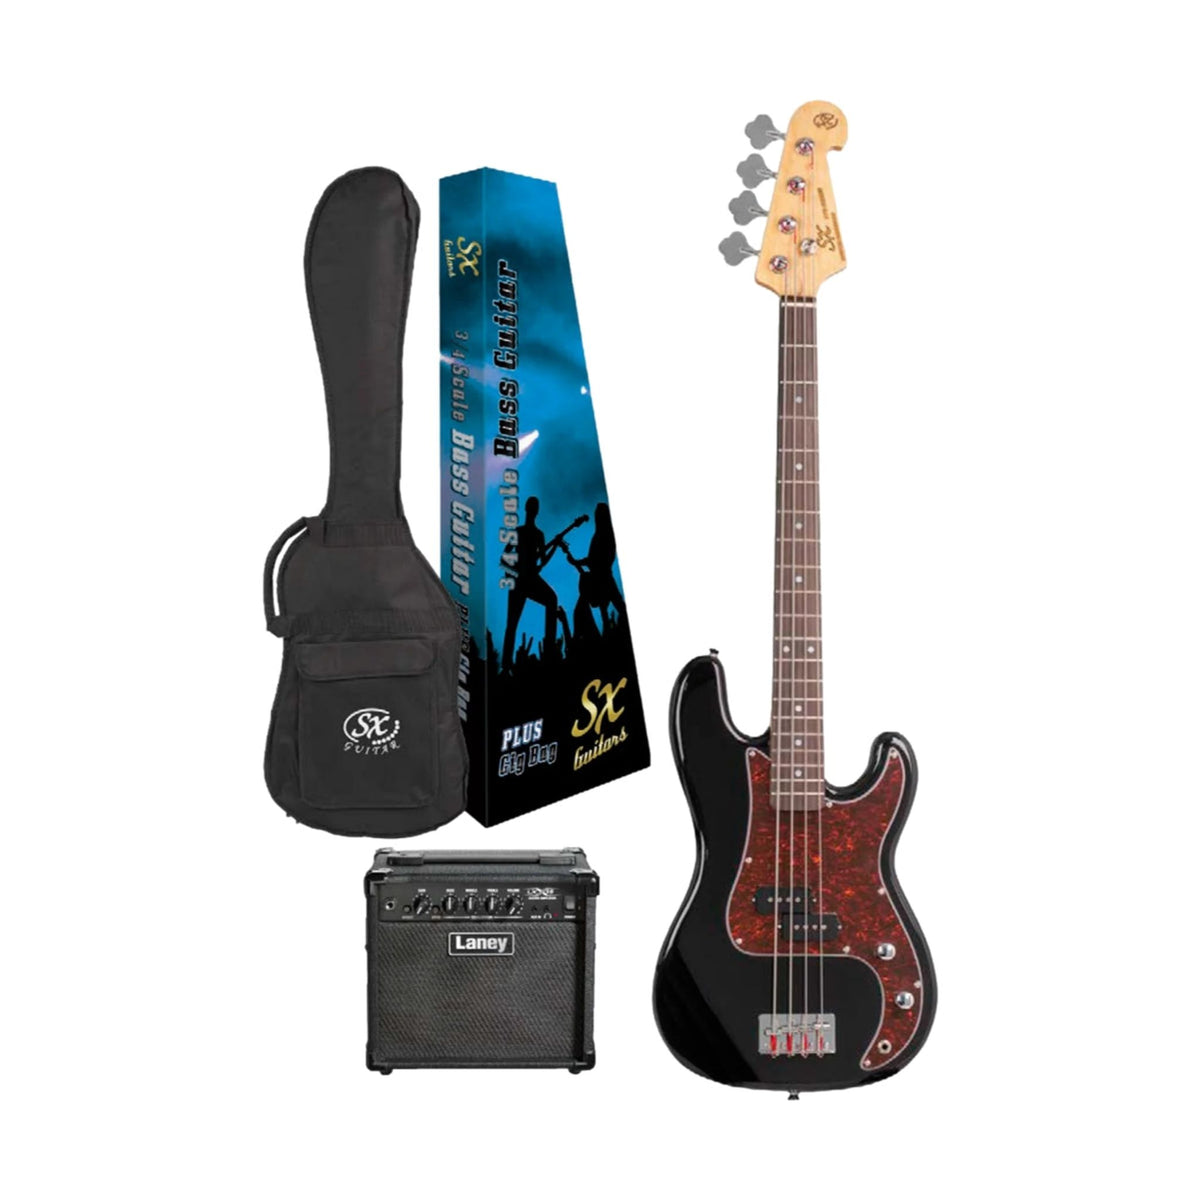 The SX Bass Guitar Pack represents exceptional value for money, build quality, playability and tone. The entire range of SX guitars are perfect for beginners and experienced players looking for a bargain or budget workhorse.